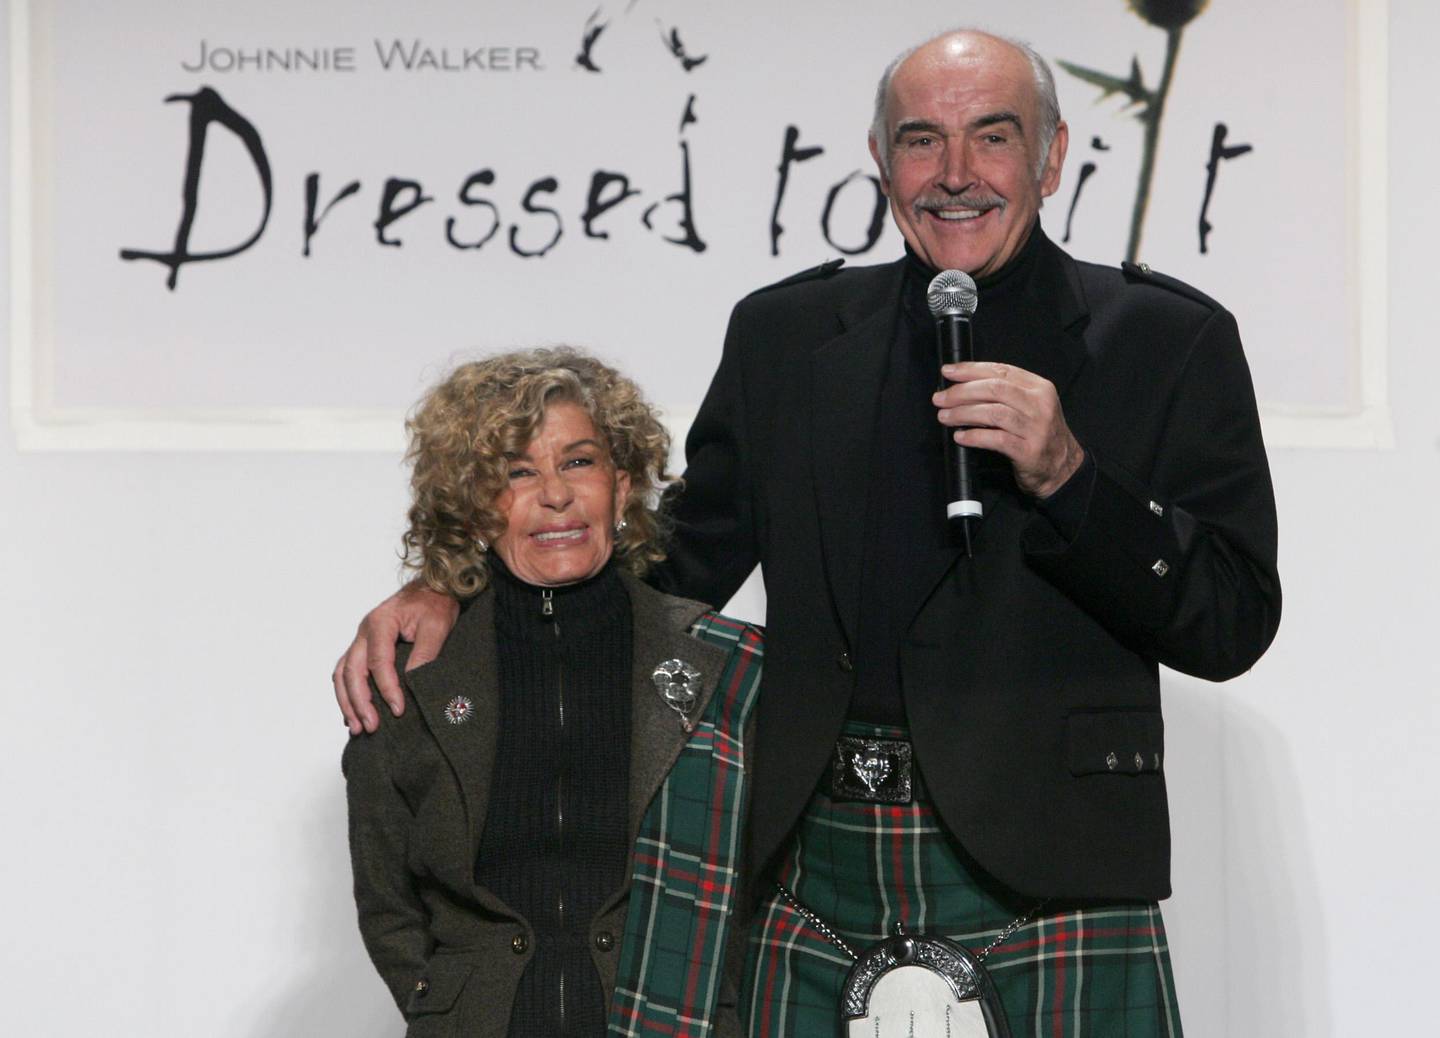 Sir Sean Connery and his wife Micheline attend the "Dressed to Kilt" fashion show, Monday, April 3, 2006, in New York, which benefits Friends of Scotland, a charity dedicated to advancing contemporary Scottish issues in the United States.  The fashion show highlights top designers from Scotland and modern kilt designs.  (AP Photo/Diane Bondareff)